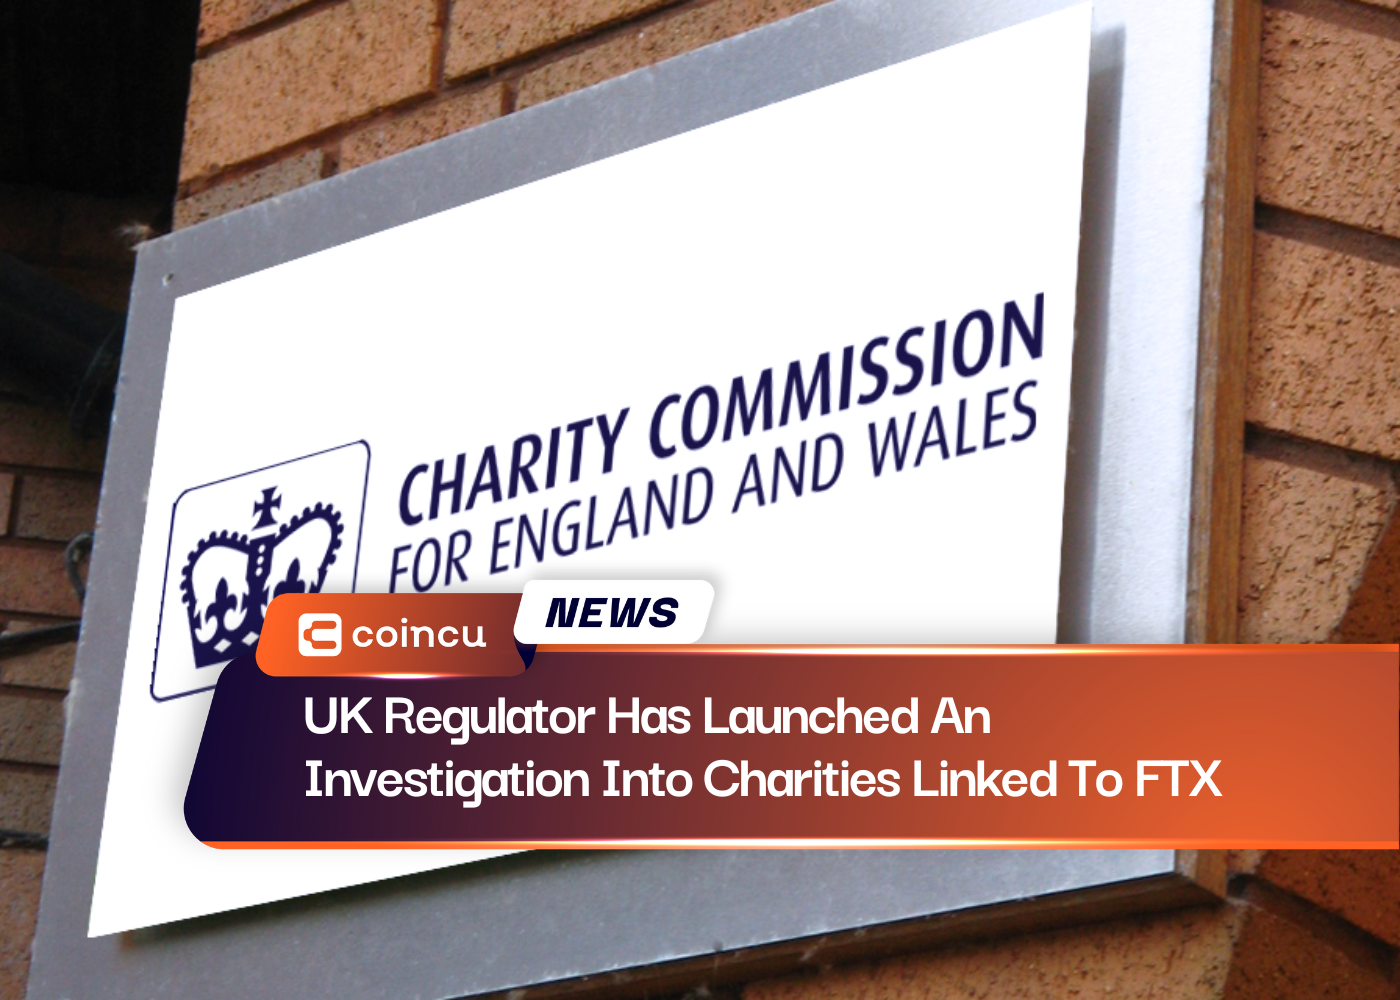 UK Regulator Has Launched An Investigation Into Charities Linked To FTX